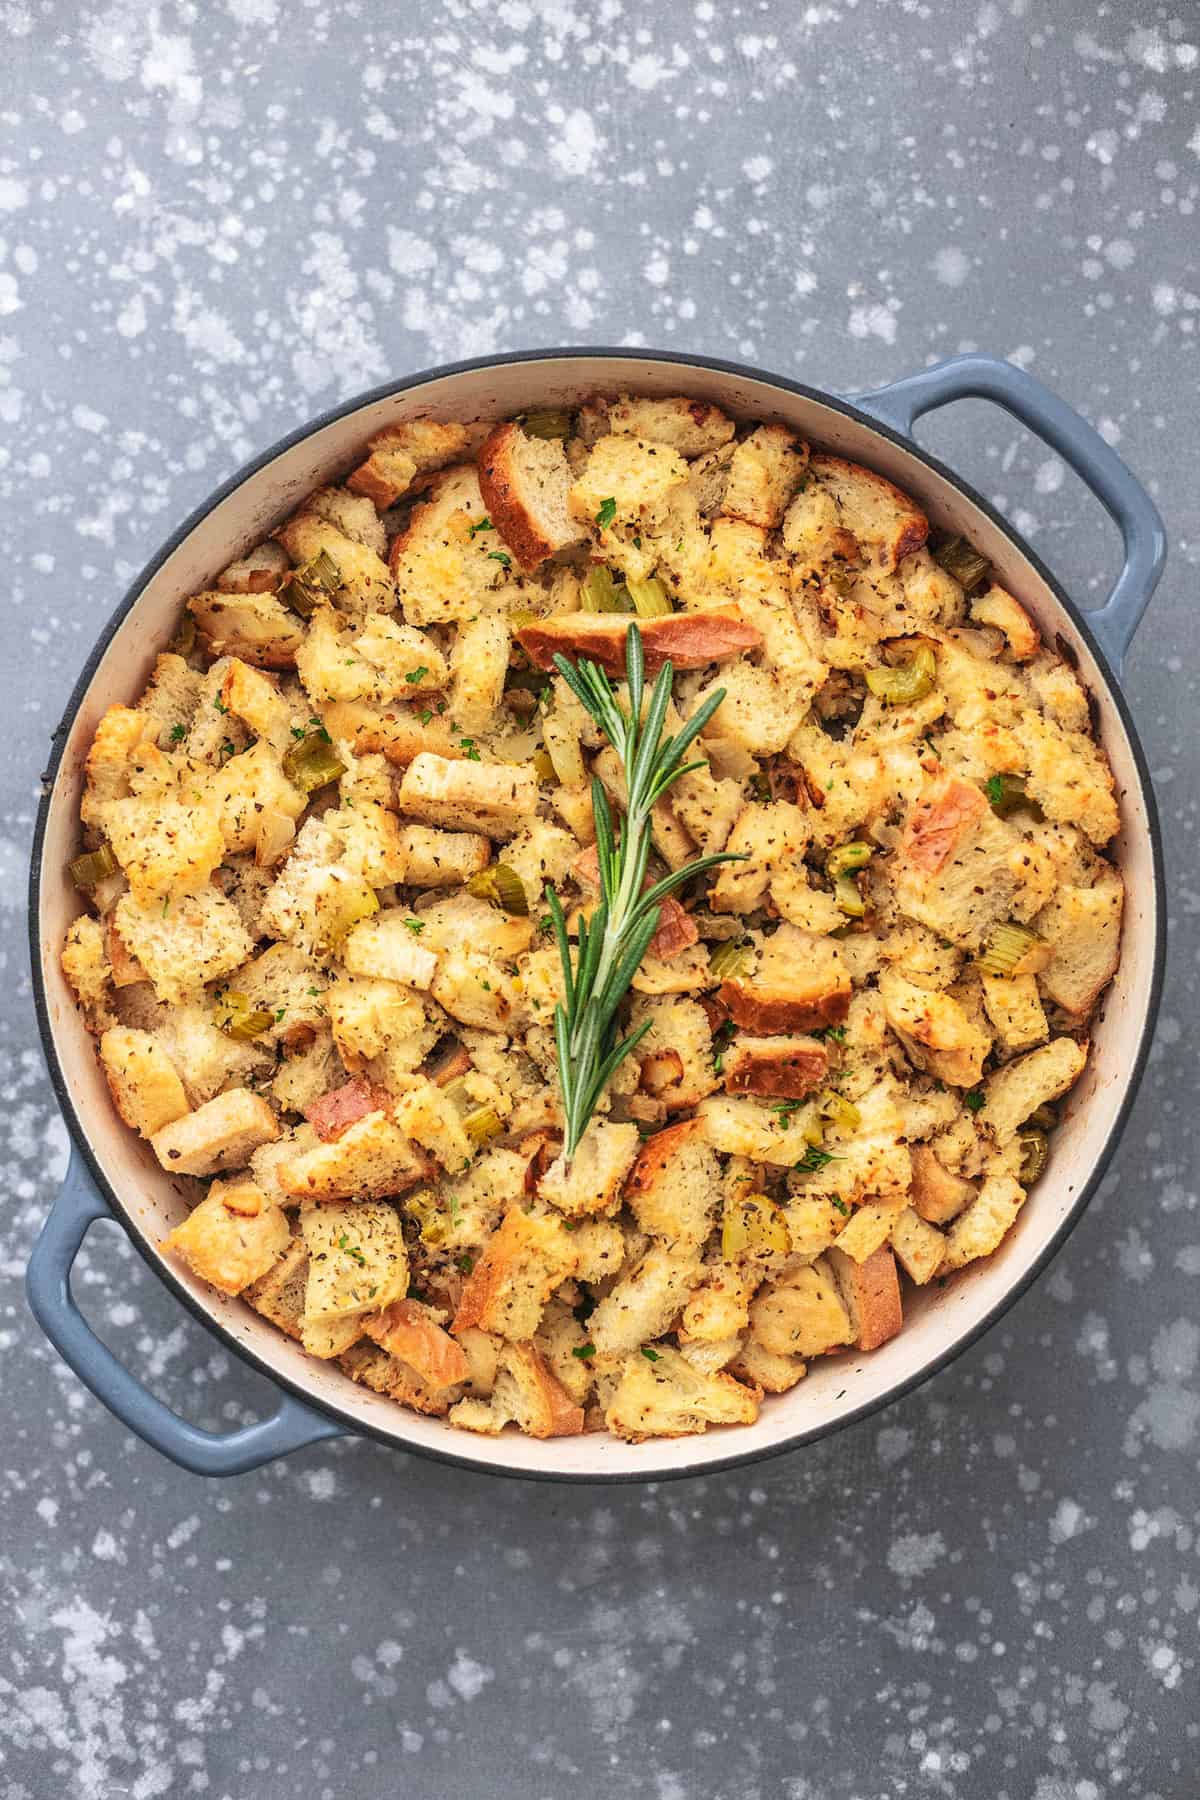 top view of homemade stuffing in a pan.